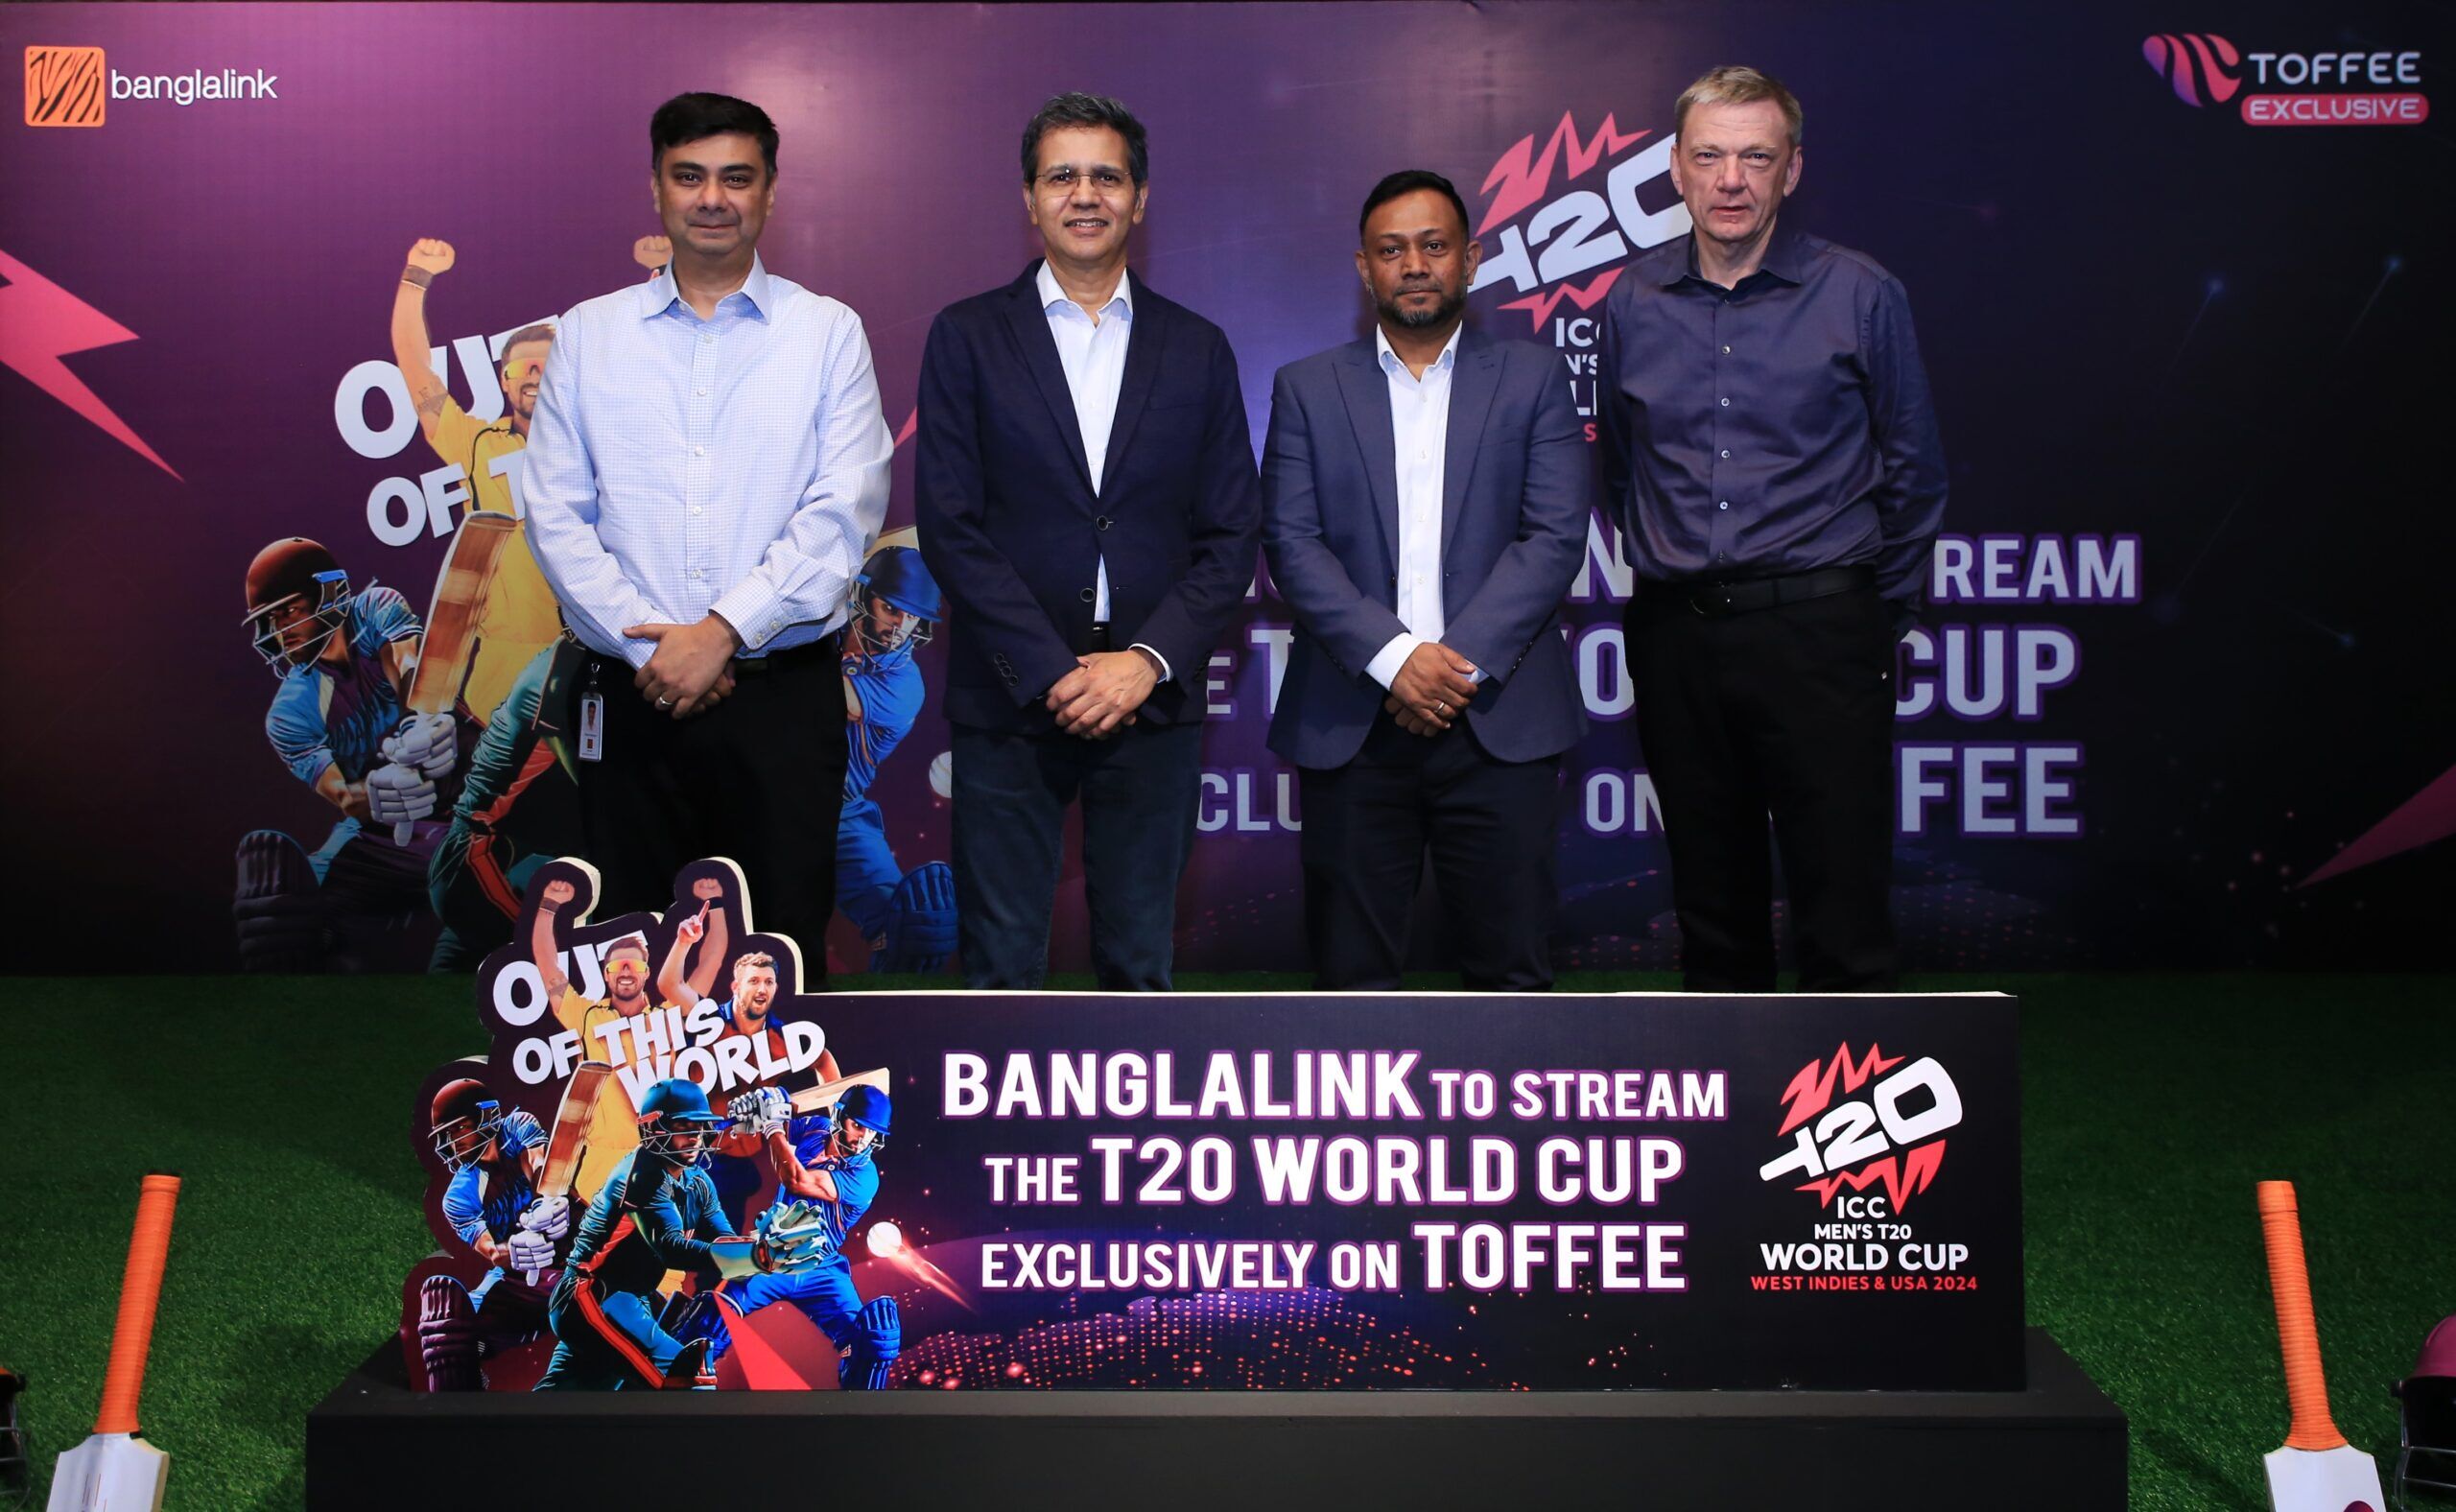 Banglalink Secures Exclusive Digital Streaming Rights of ICC Cricket Tournaments for Toffee-Markedium